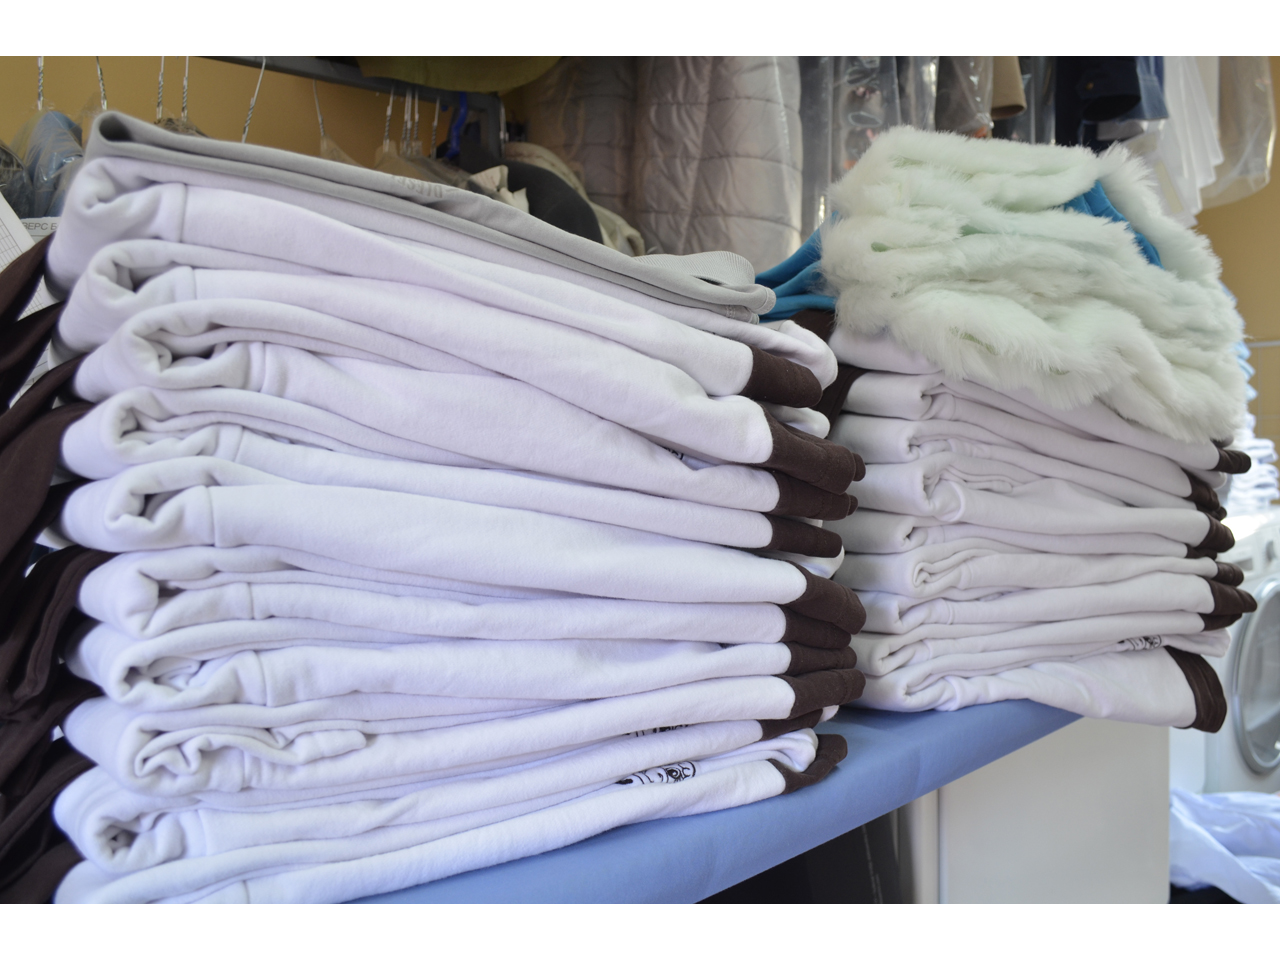 GLANC WASH - DRY CLEANING AND LAUNDRY Dry-cleaning Beograd